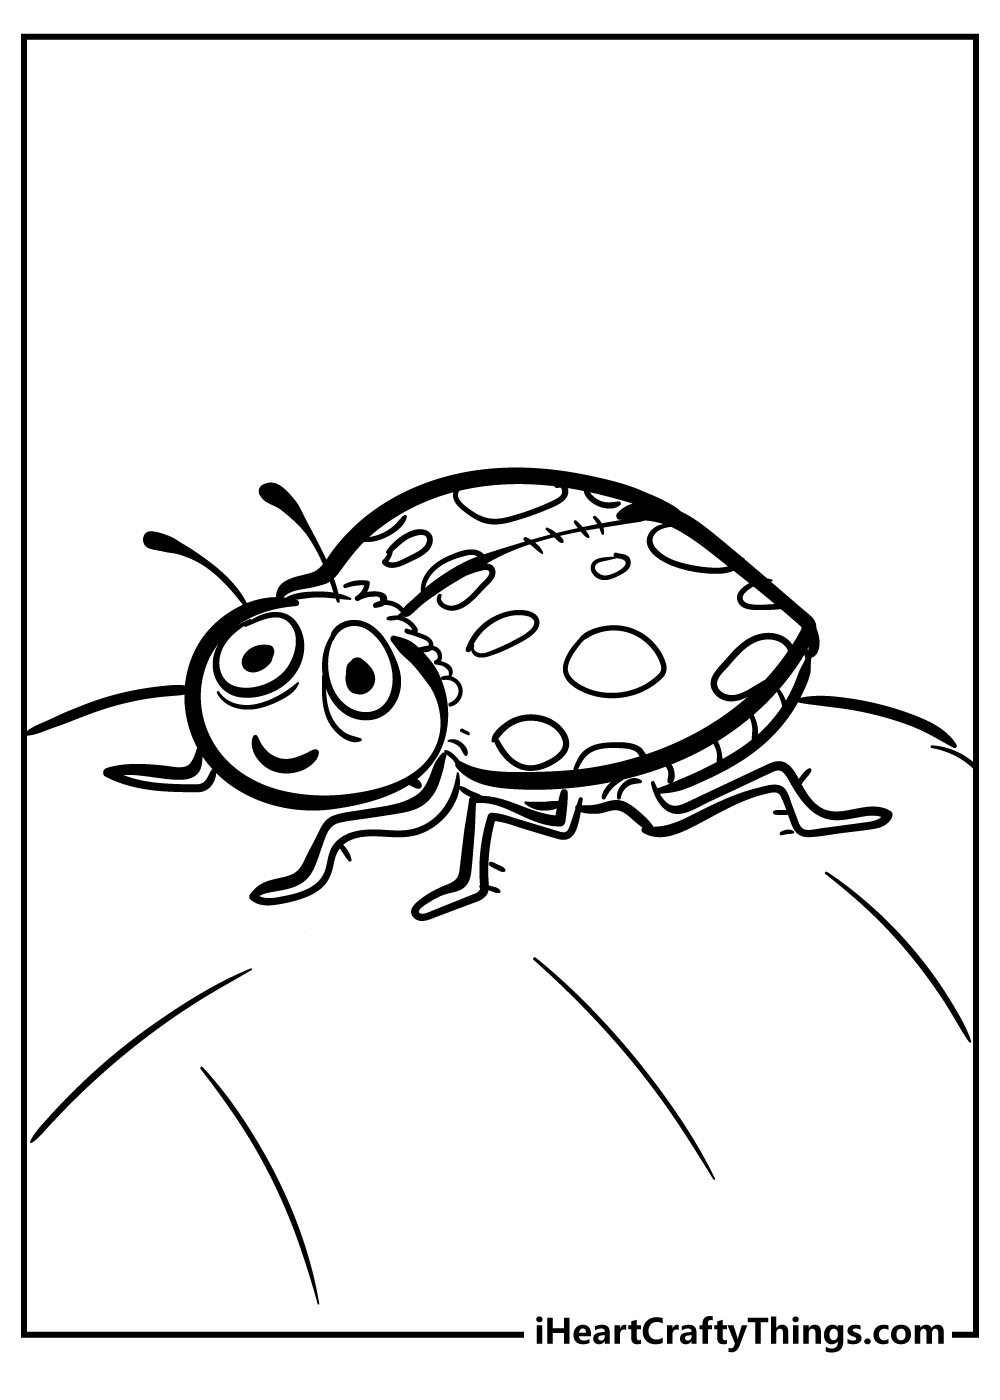 Insect Coloring Pages for preschoolers free printable